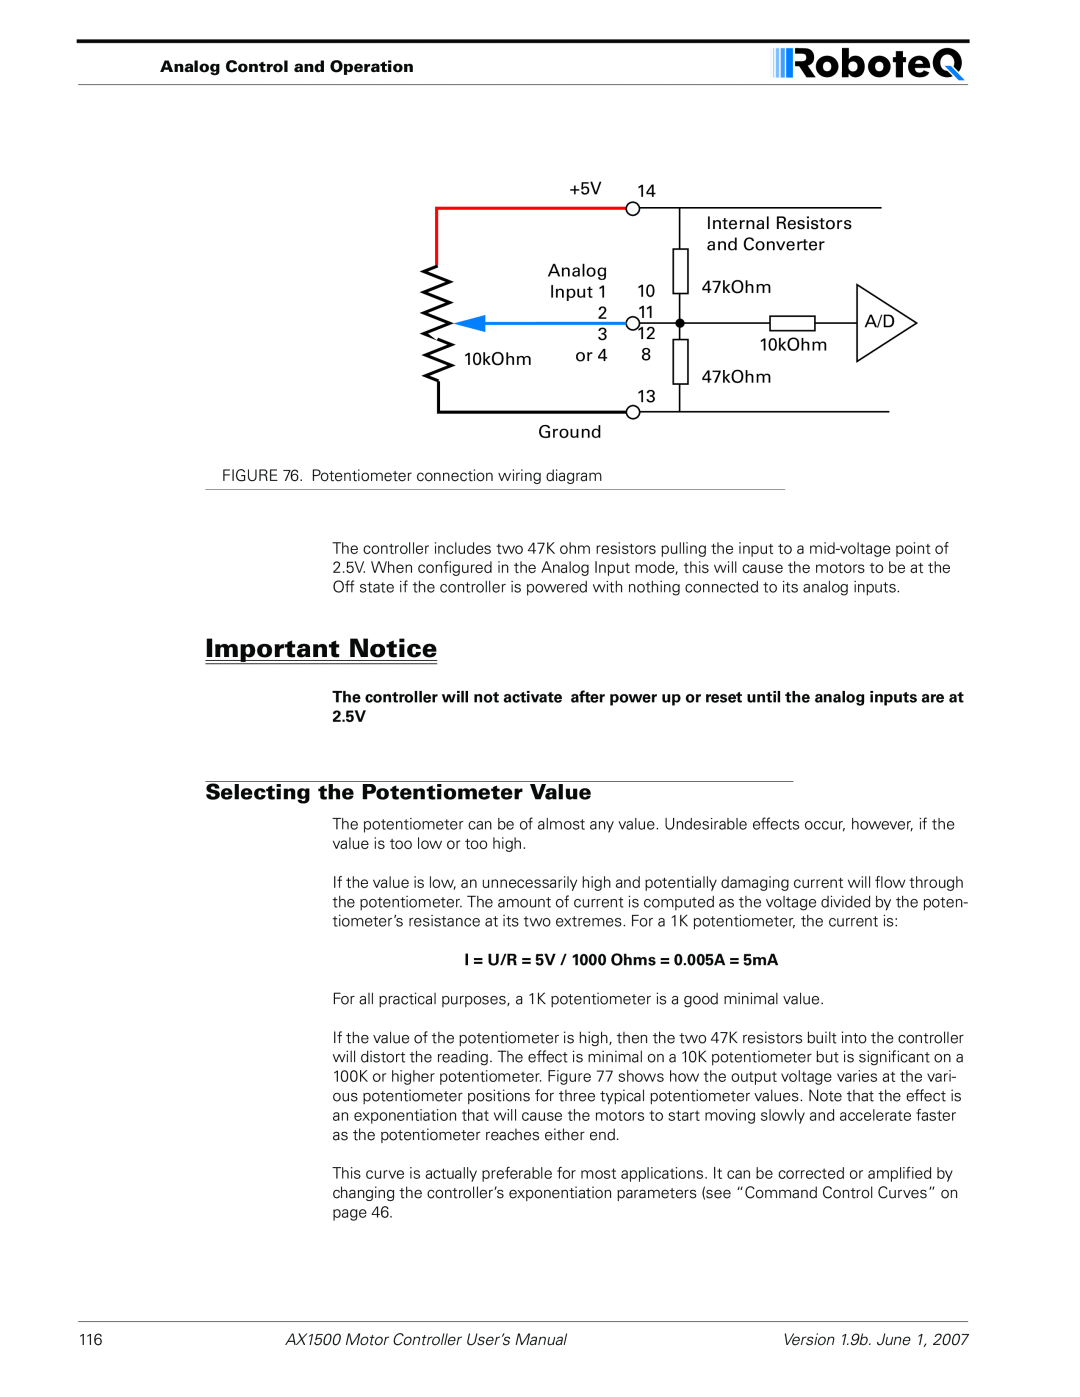 RoboteQ AX2550, AX1500 user manual Selecting the Potentiometer Value, Important Notice 